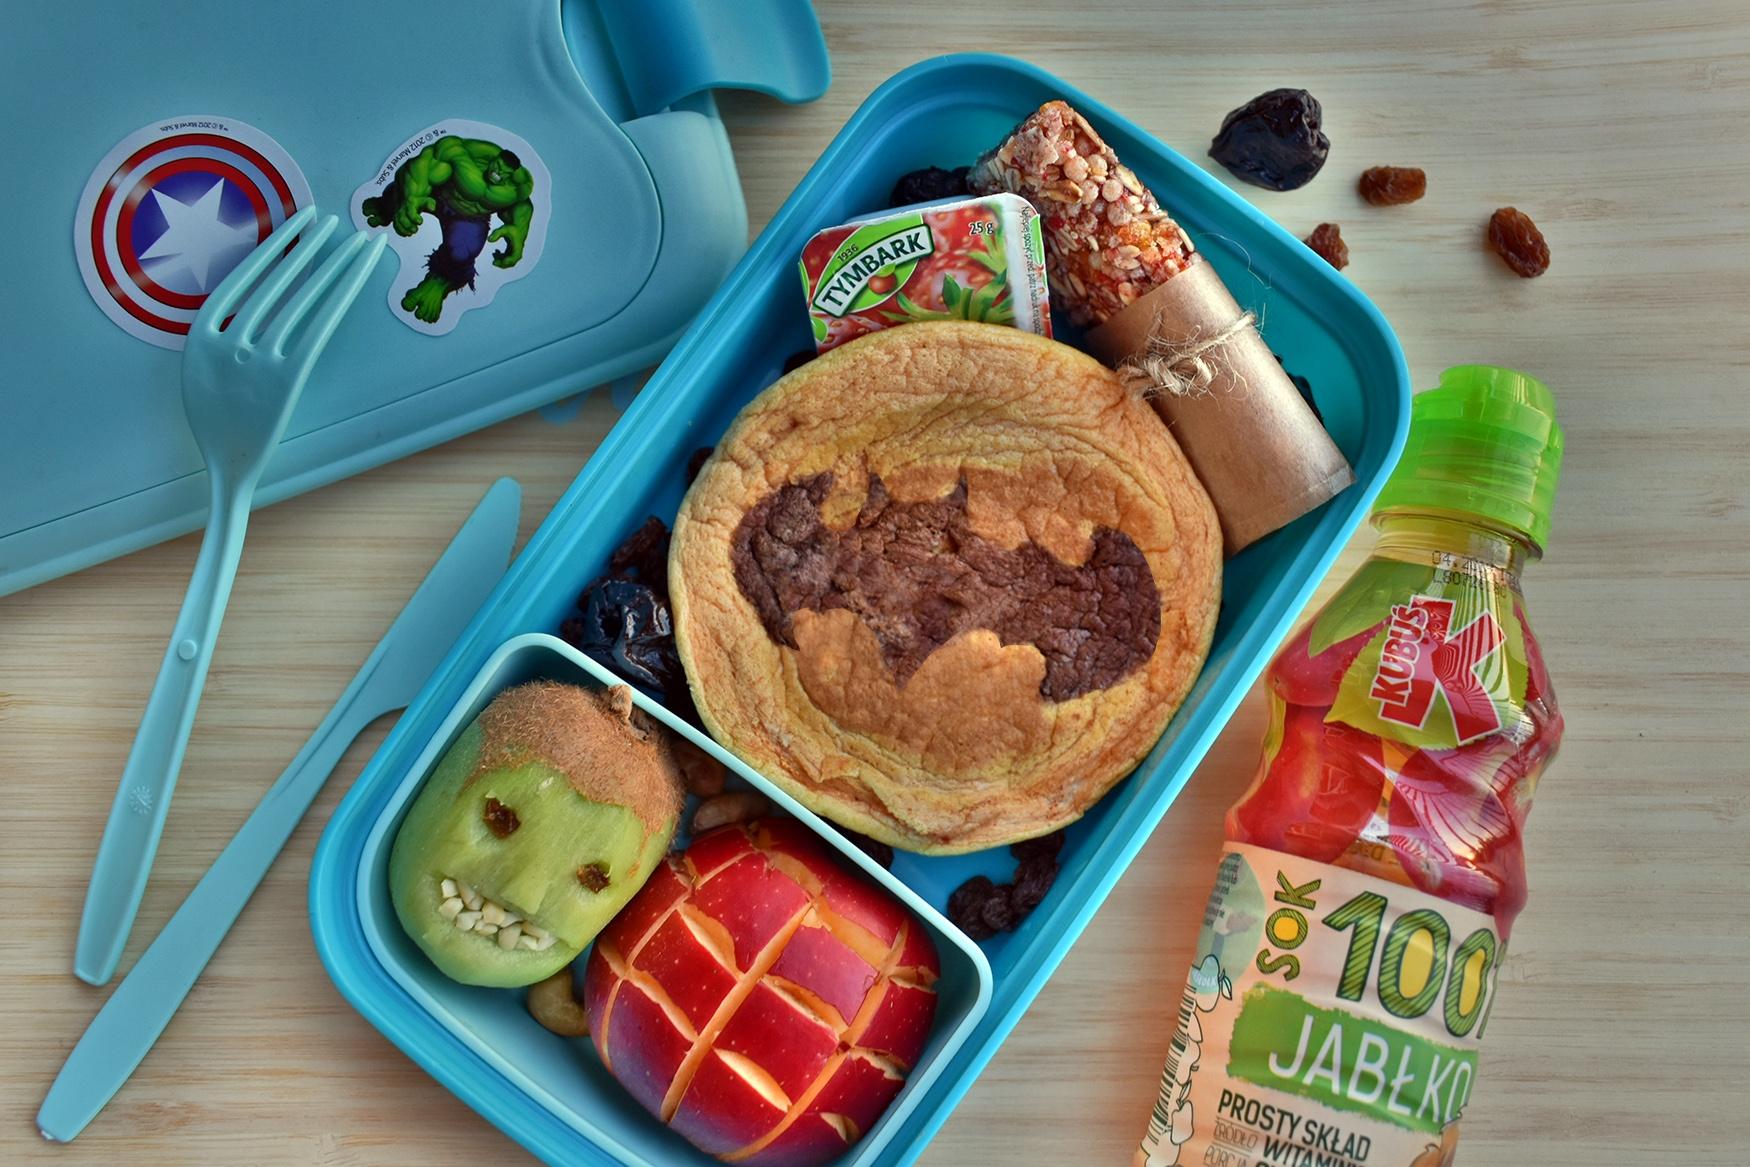 Lunchbox Superbohatera